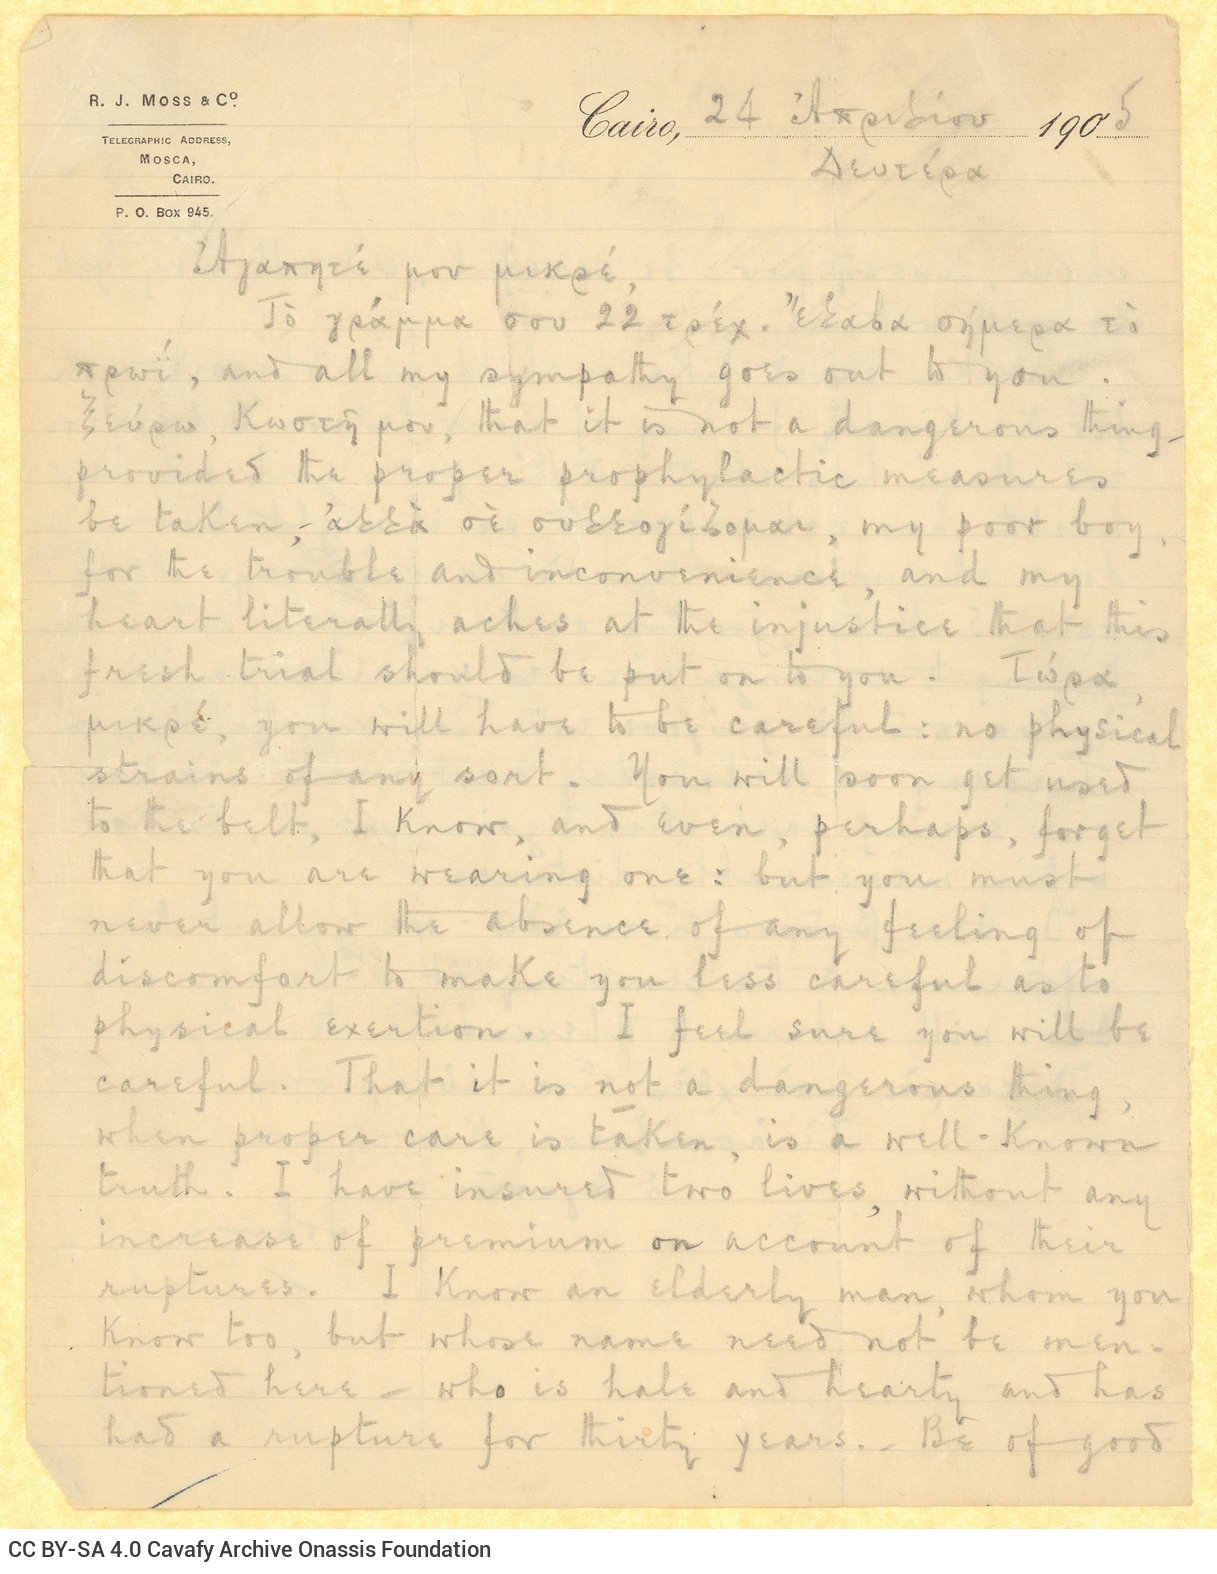 Handwritten letter by John Cavafy to C. P. Cavafy, from Cairo, where John Cavafy lives and works. The letter is written in En